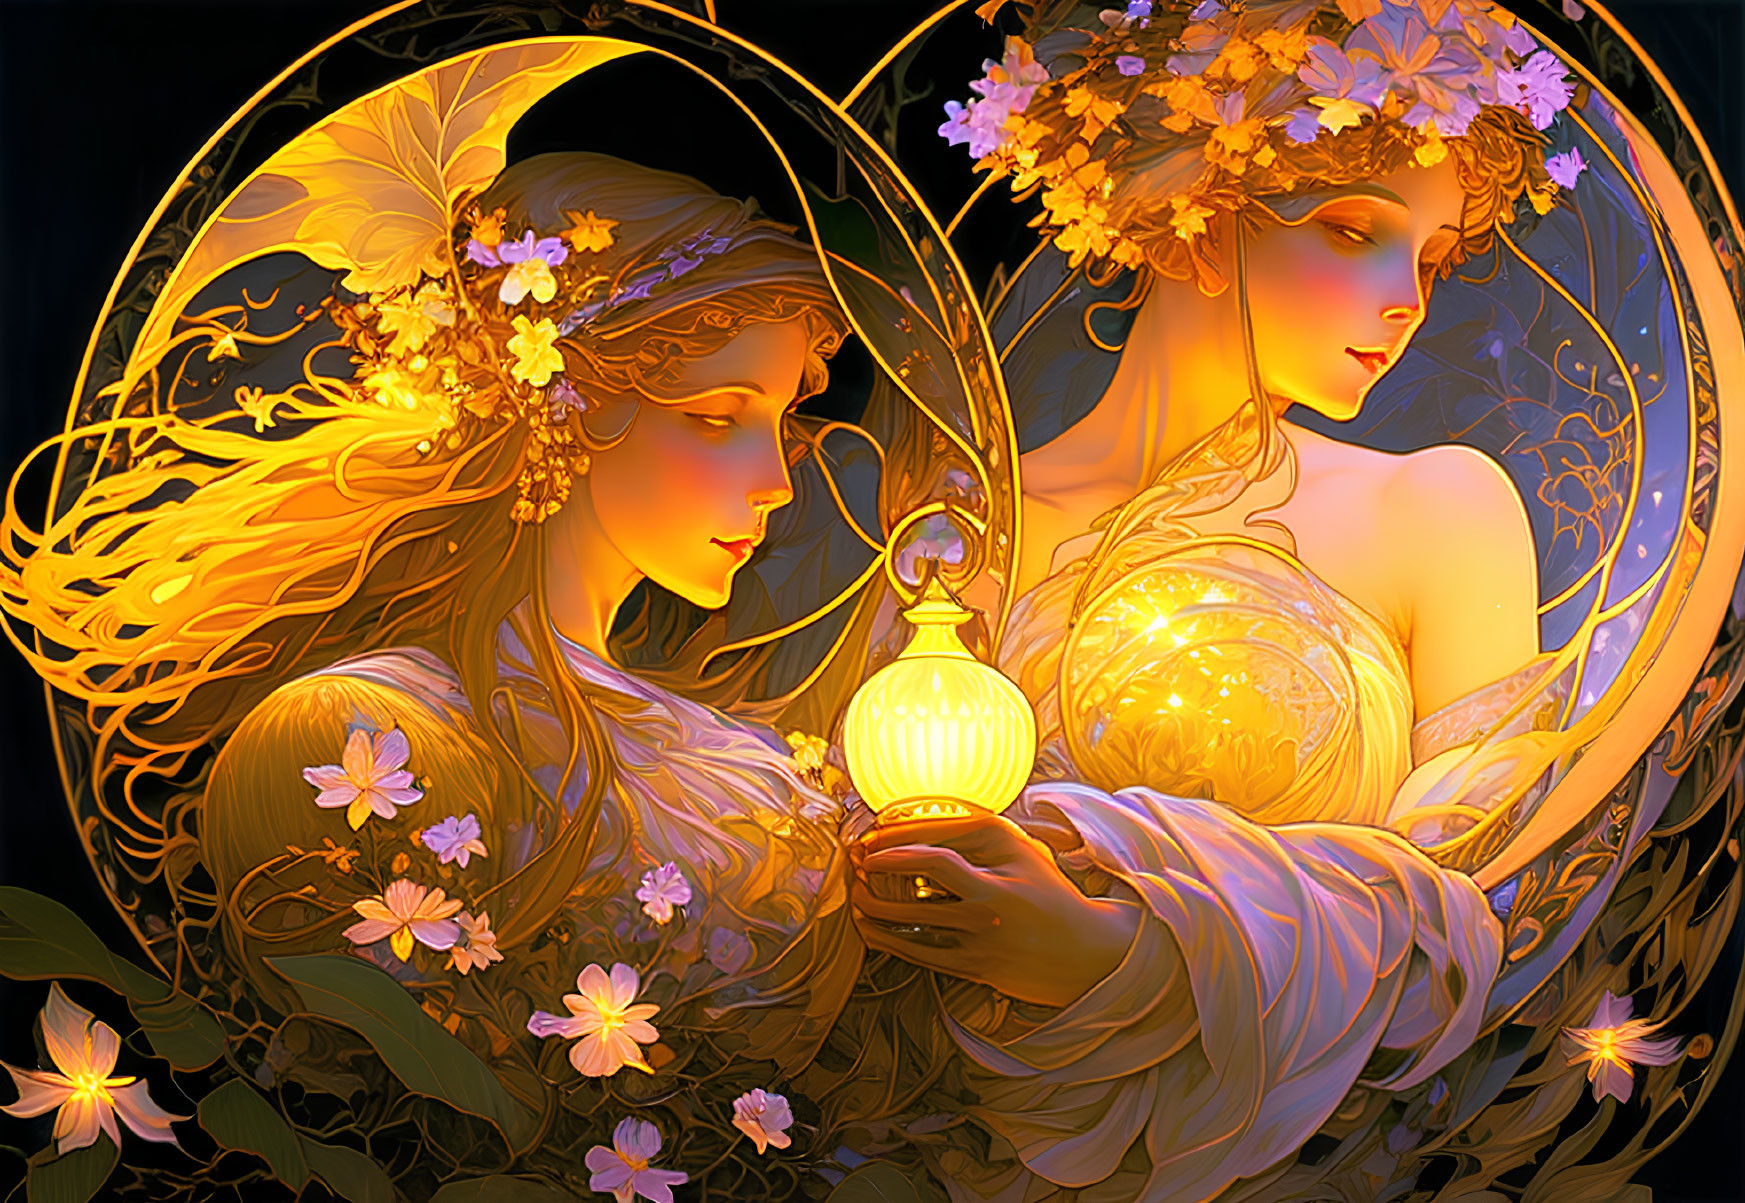 Ethereal women with floral crowns in golden light and Art Nouveau patterns